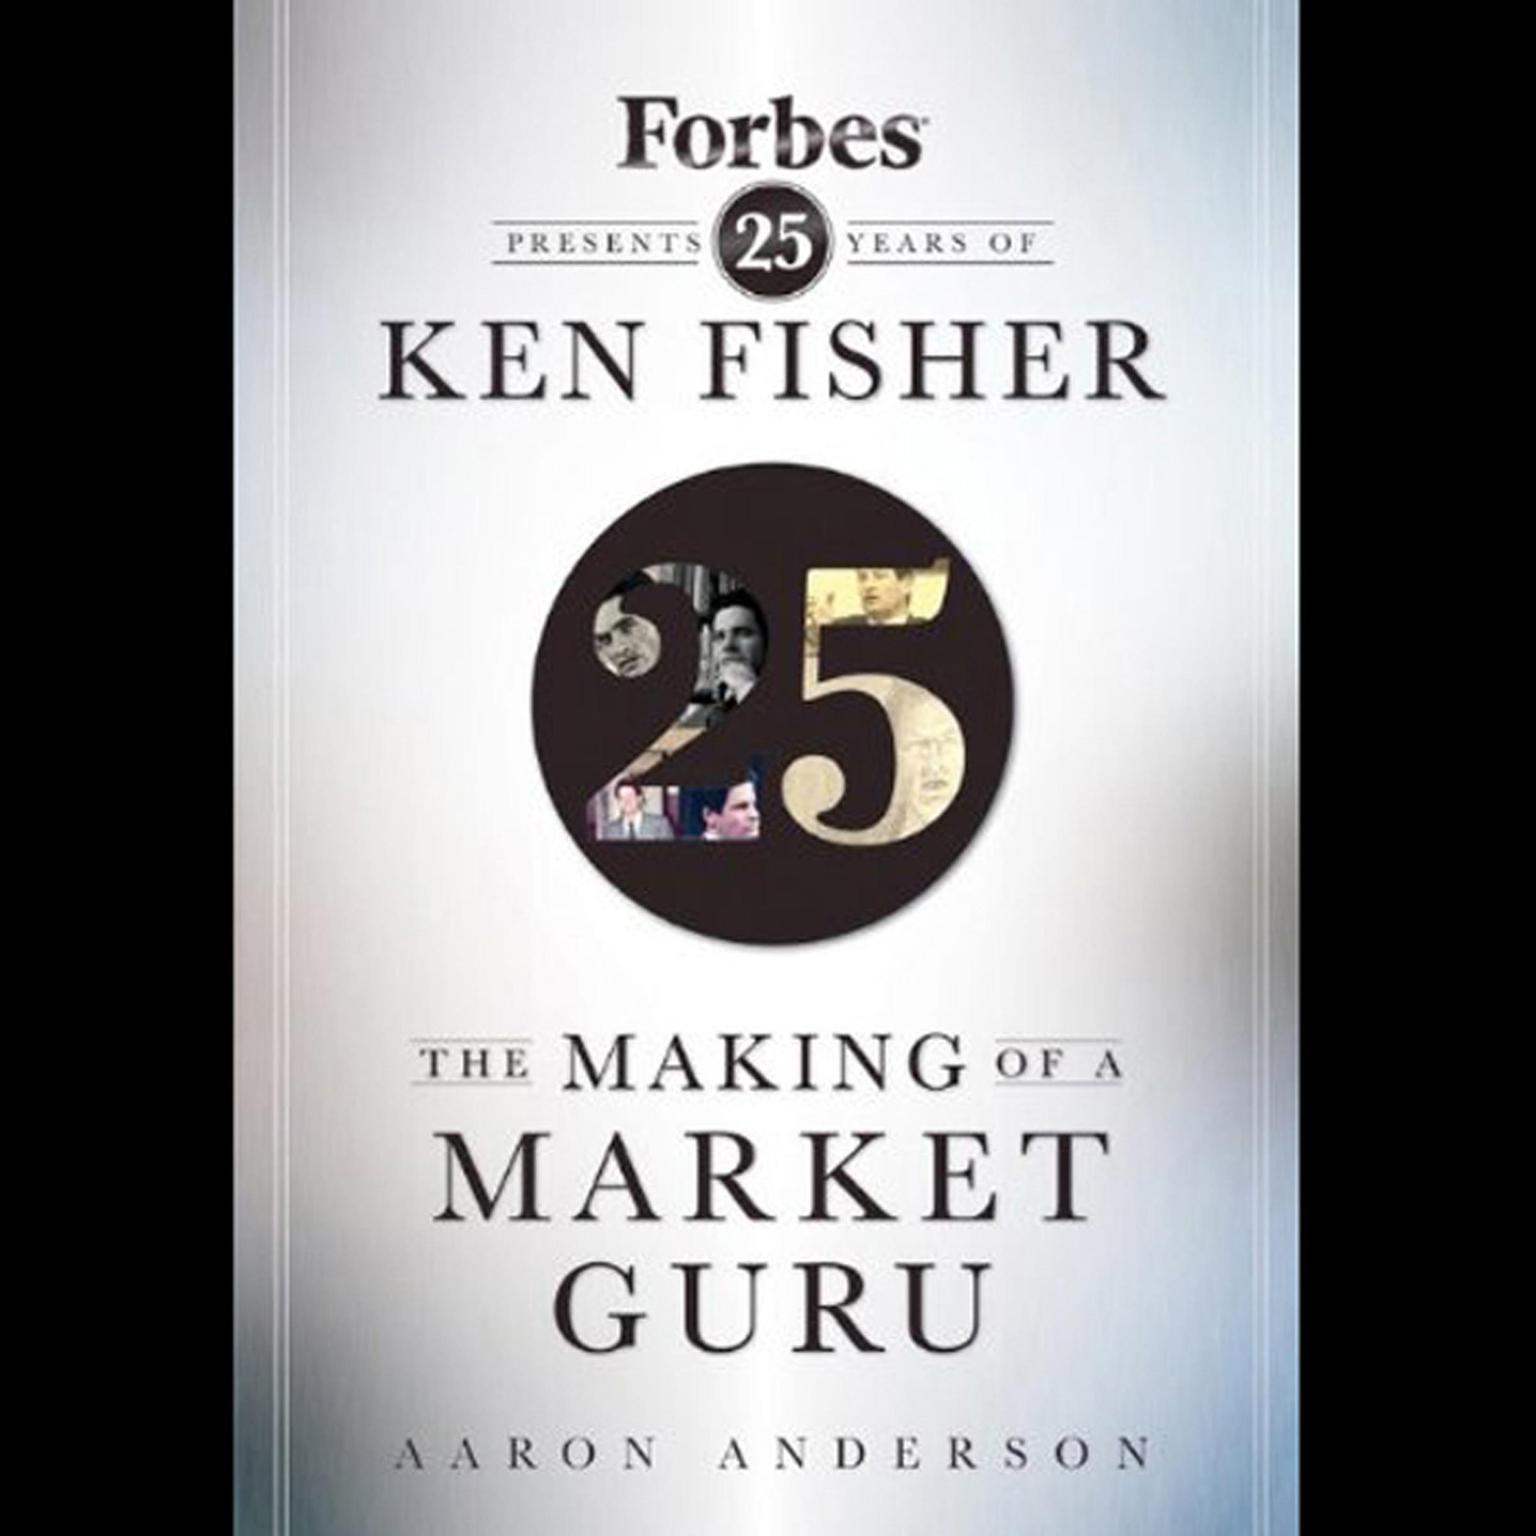 The Making of a Market Guru: Forbes Presents 25 Years of Ken Fisher  Audiobook, by Aaron Anderson